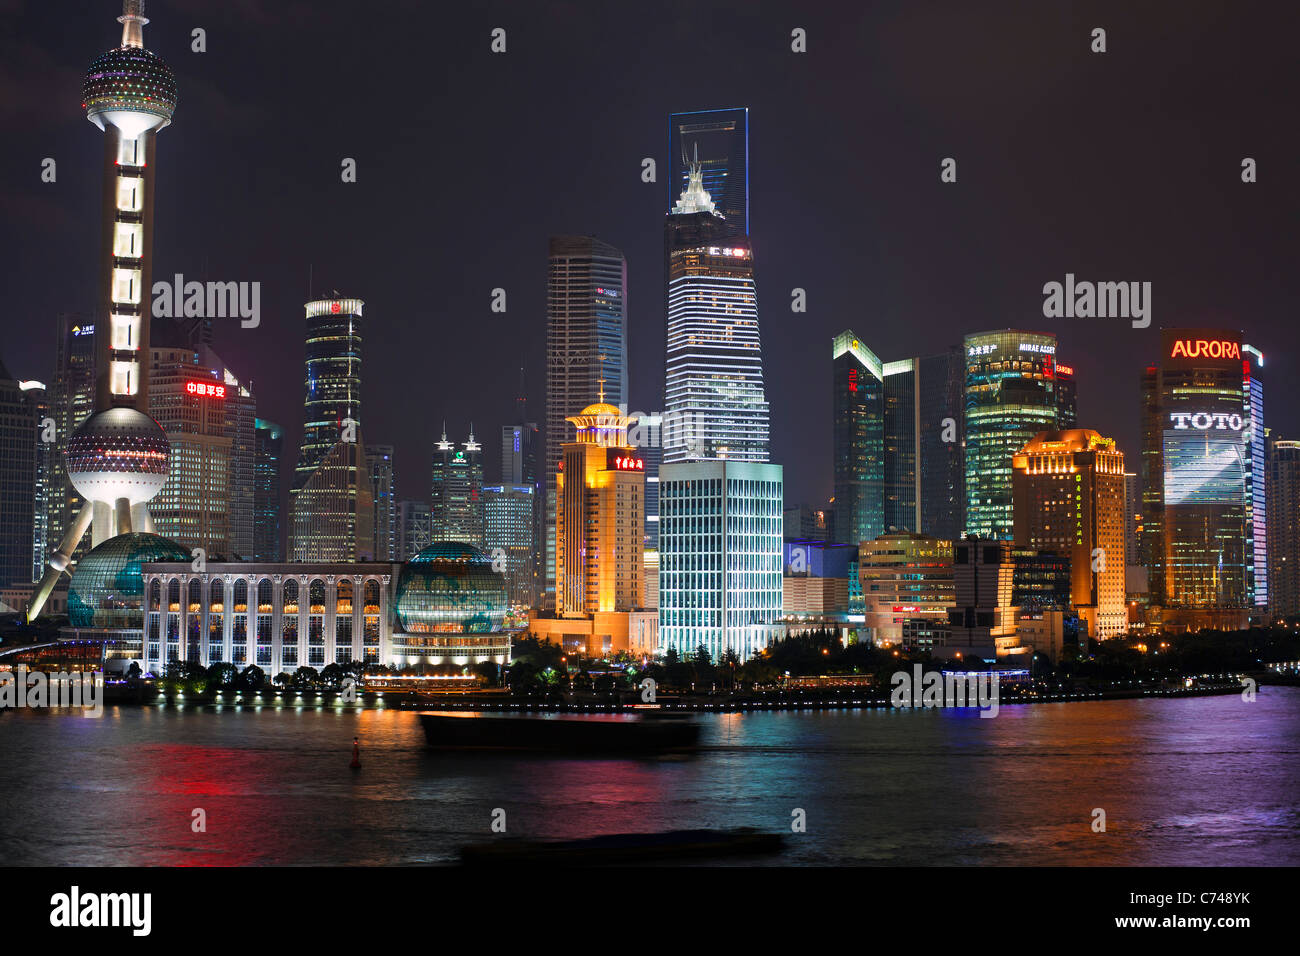 Pudong skyline (elevated view across Huangpu River from the Bund), Shanghai, China Stock Photo